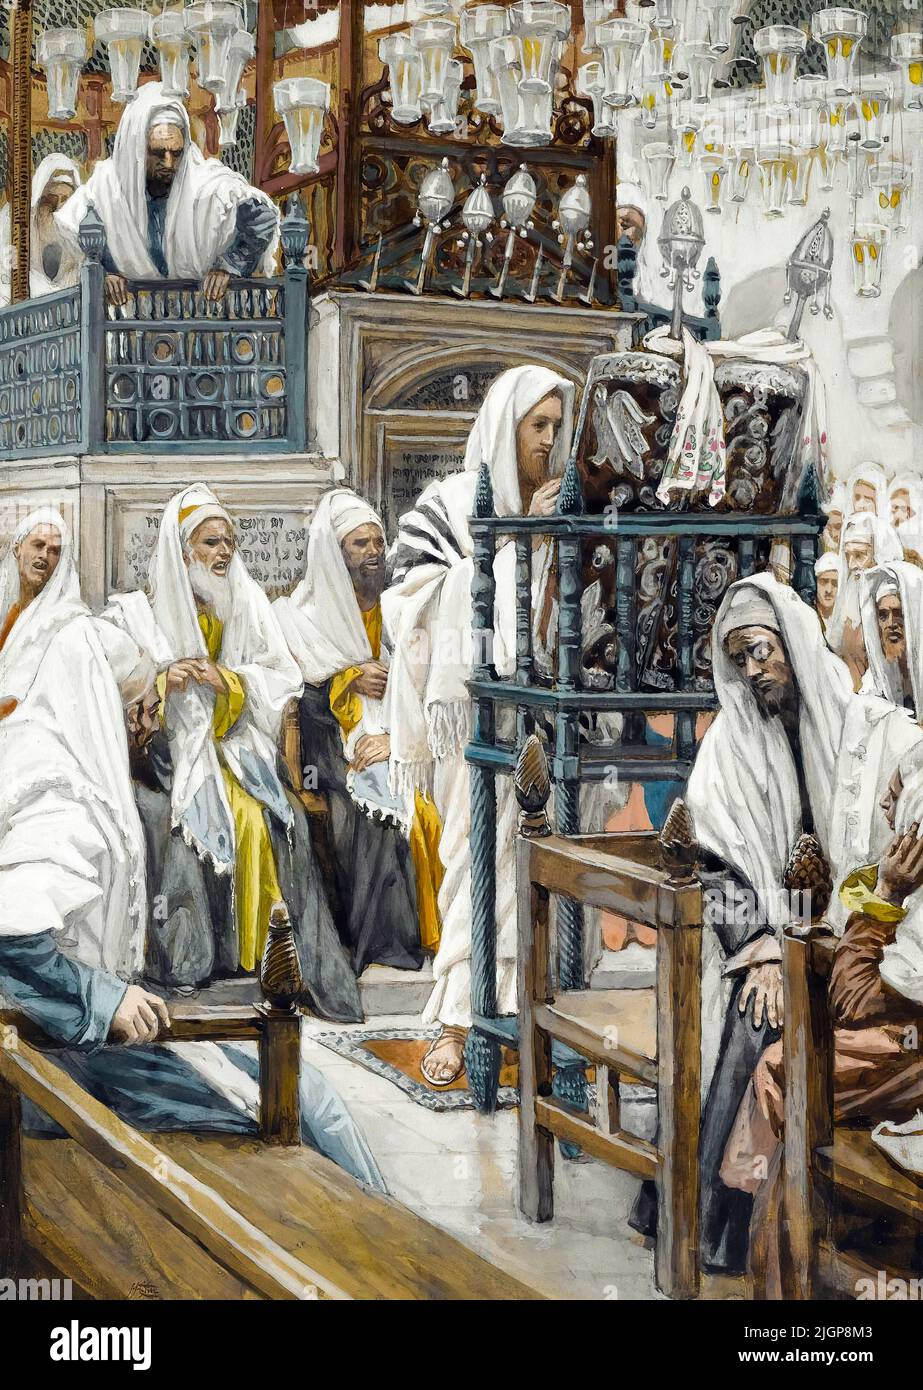 Jesus Unrolls the Book in the Synagogue, watercolour painting by James Tissot, 1886-1894 Stock Photo